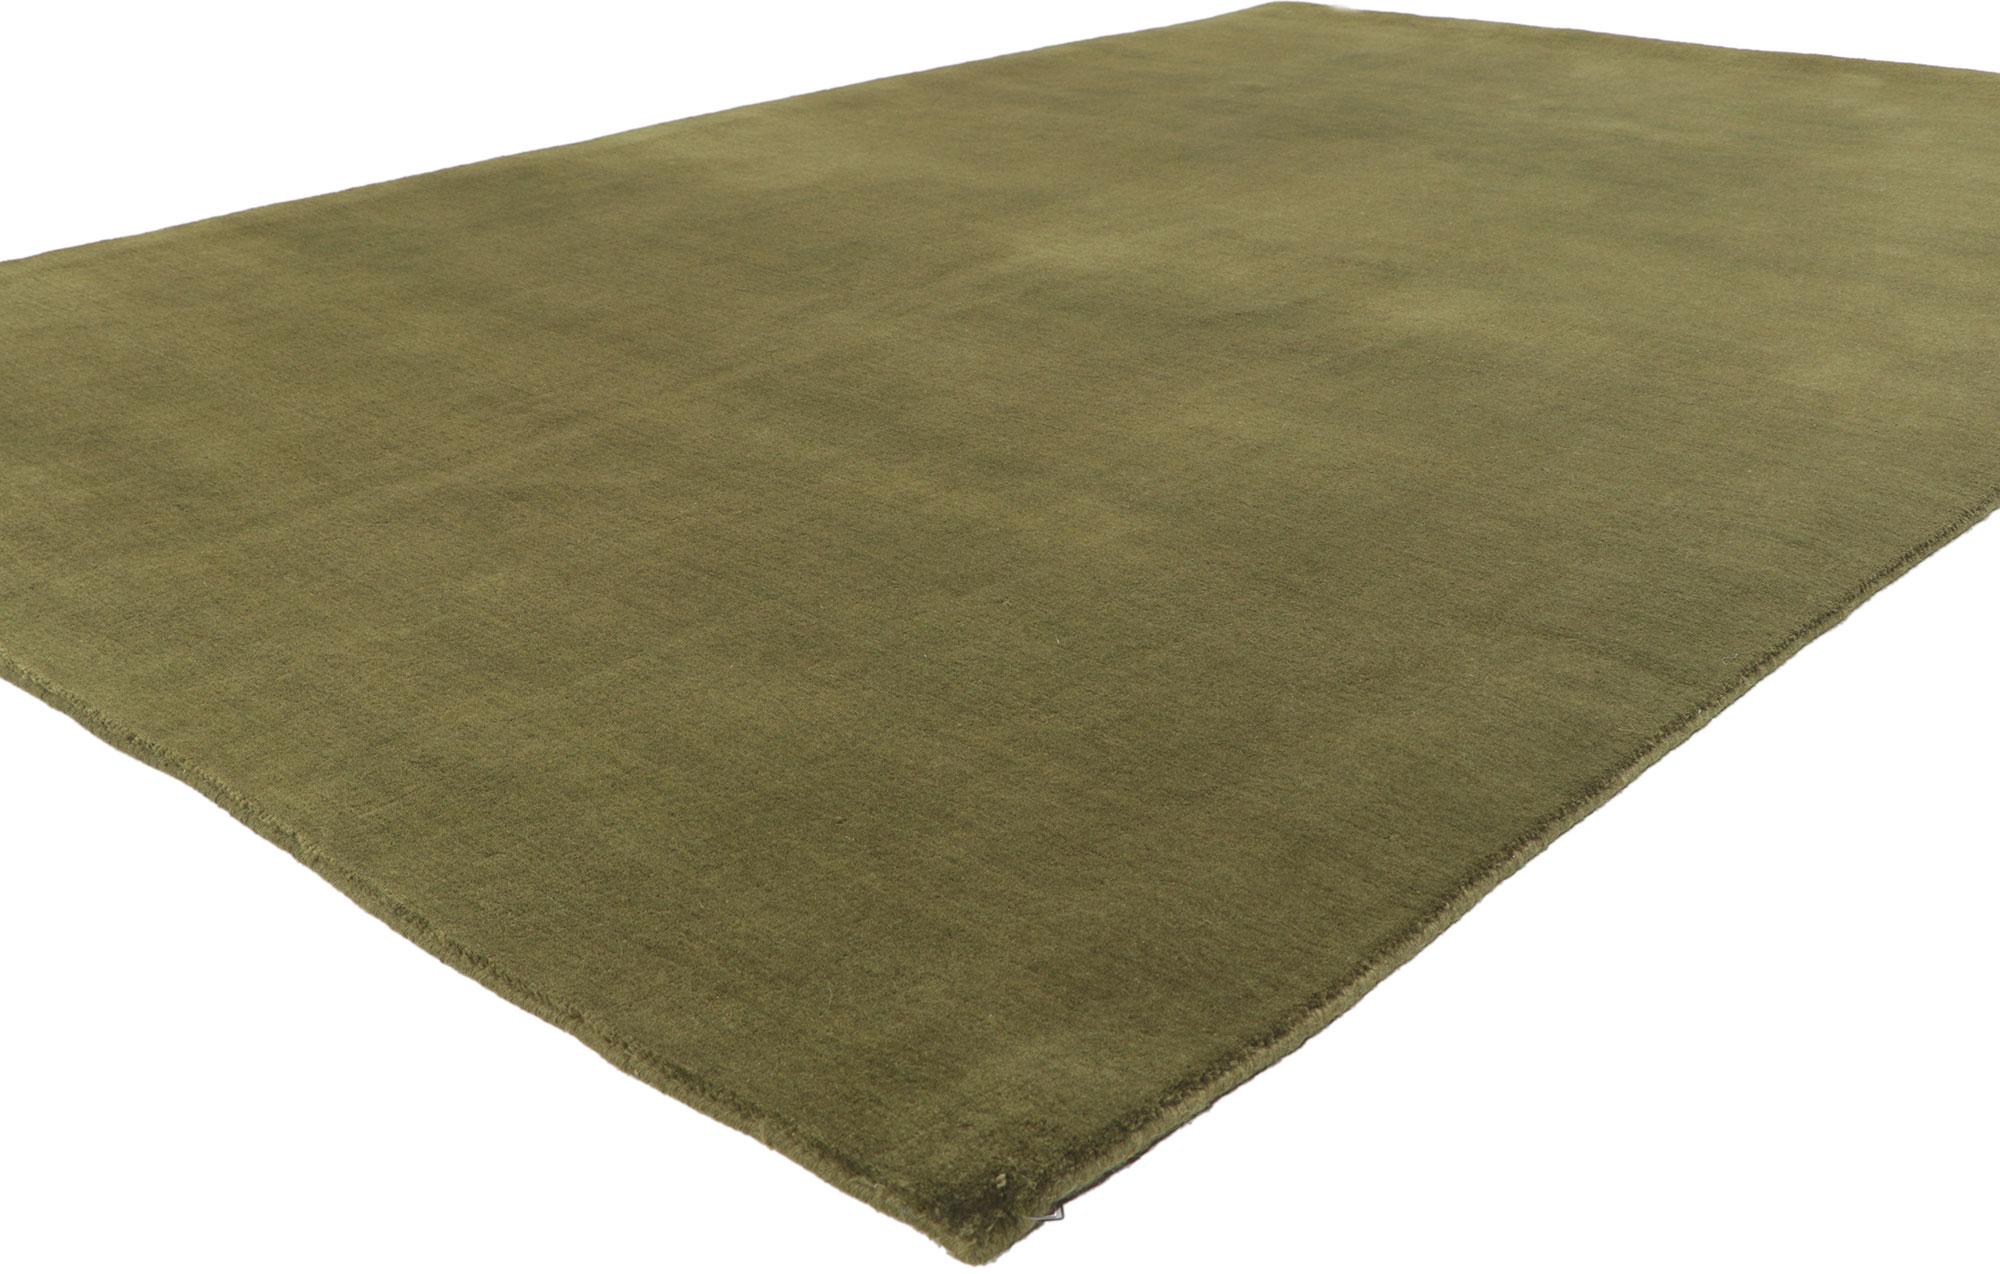 30929 New Moss-Olive Green Modern Rug, 06'02 x 09'00. Implementing biophilia with subdued ornamentation, this modern area rug is a captivating vision of woven beauty. The lavish texture and earthy green colorway woven into this piece work together